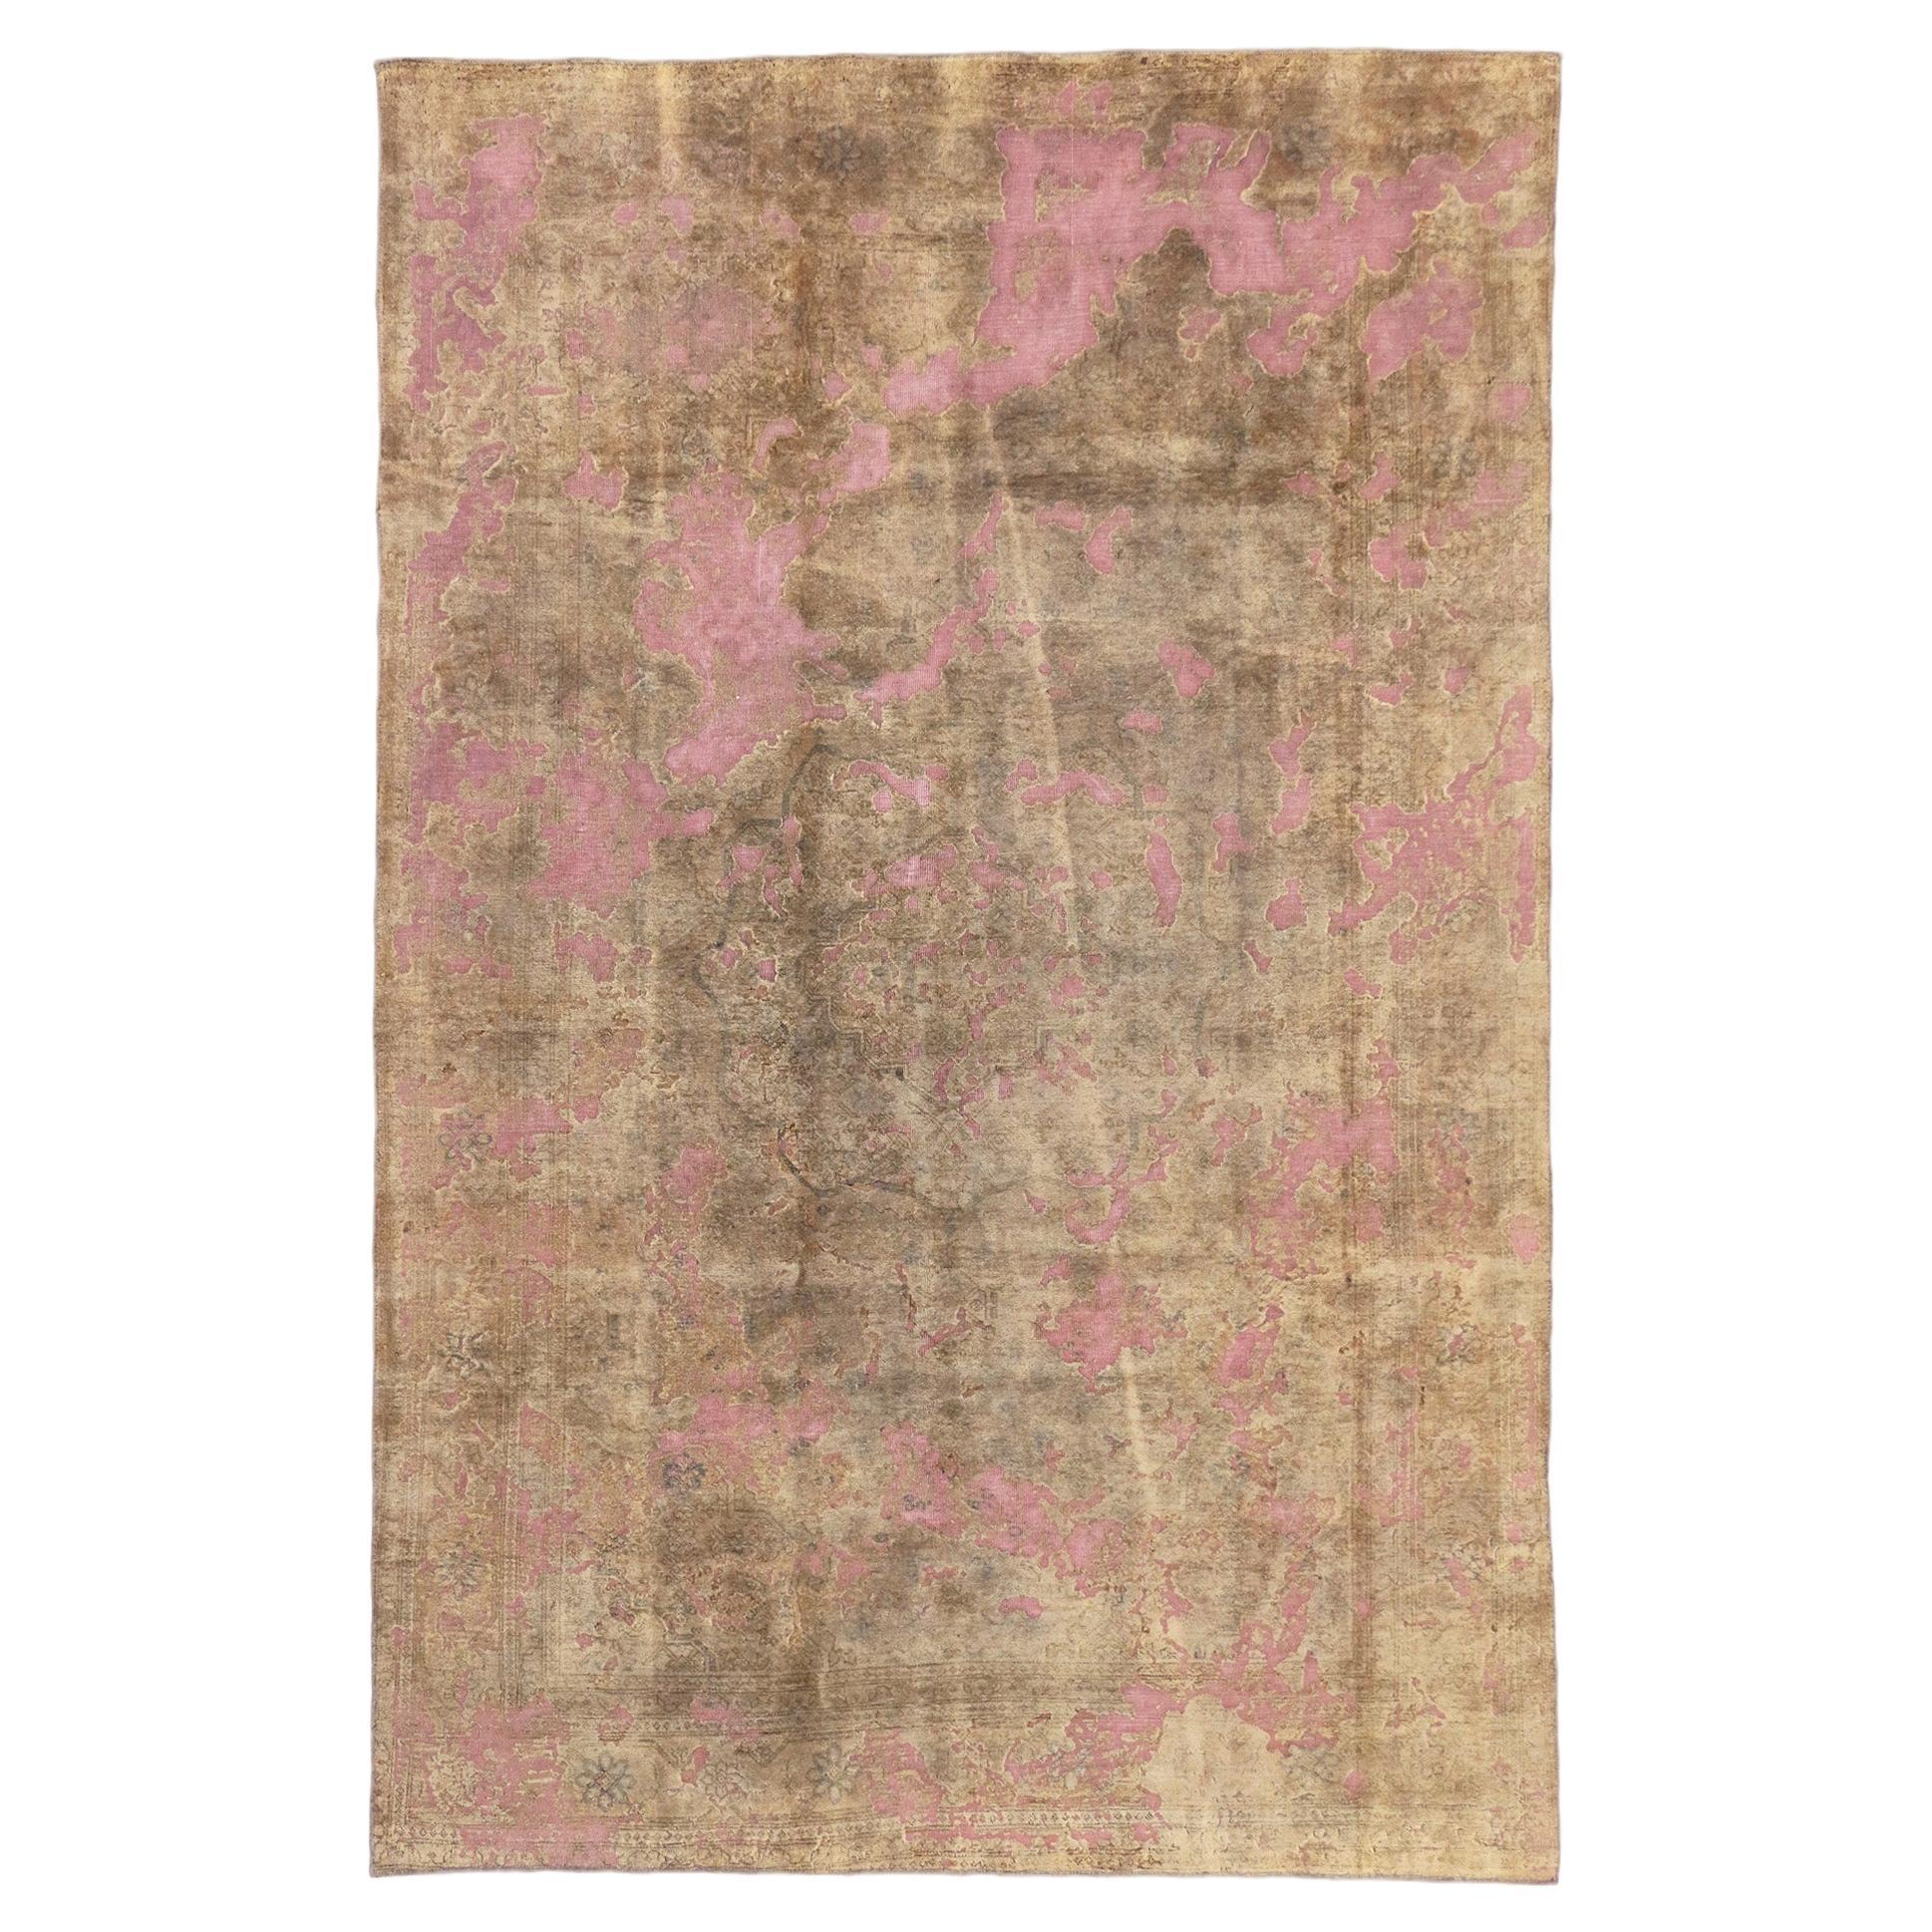 Vintage Turkish Overdyed Rug, Industrial Chic Meets Abstract Expressionism For Sale